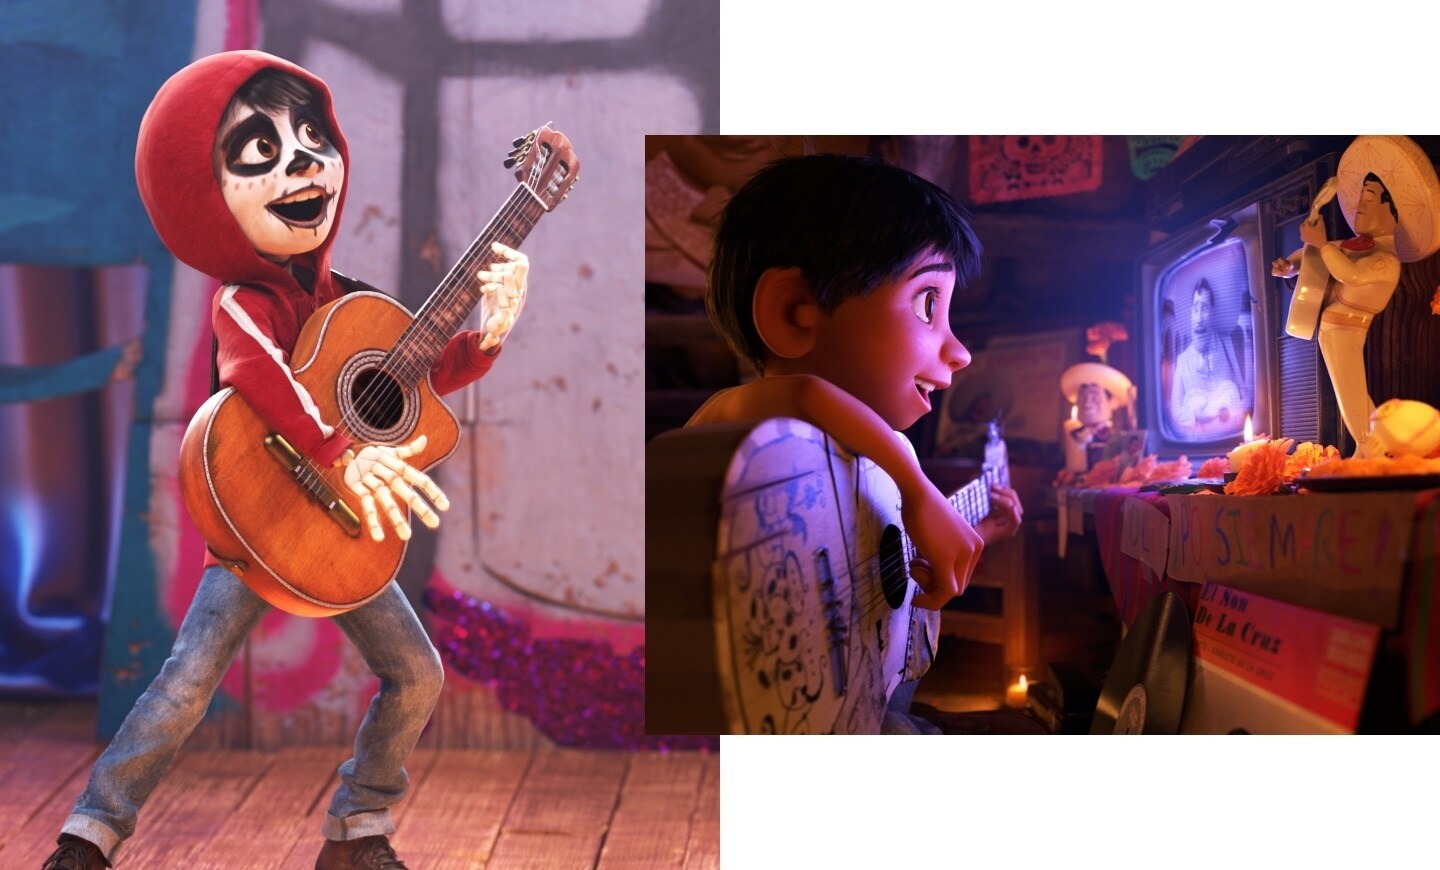 Miguel playing the guitar dressed up as a skeleton and Miguel playing the guitar watching Ernesto on the TV